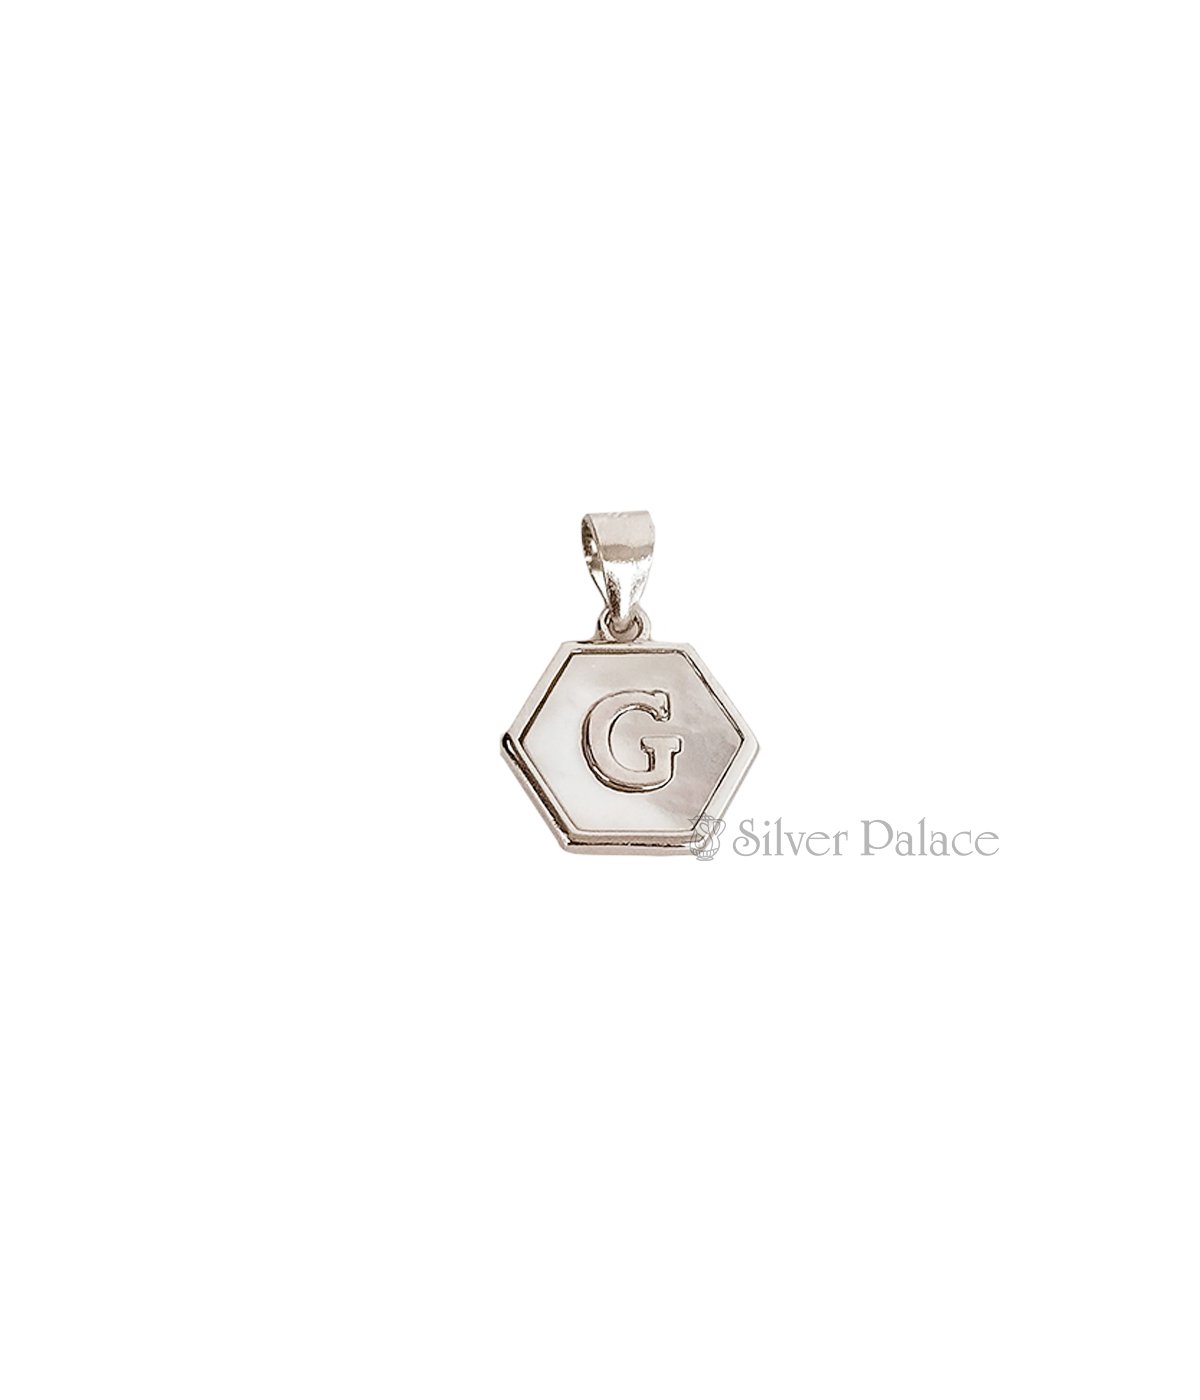 92.5 STERLING SILVER INITIAL LETTER G PENDANT